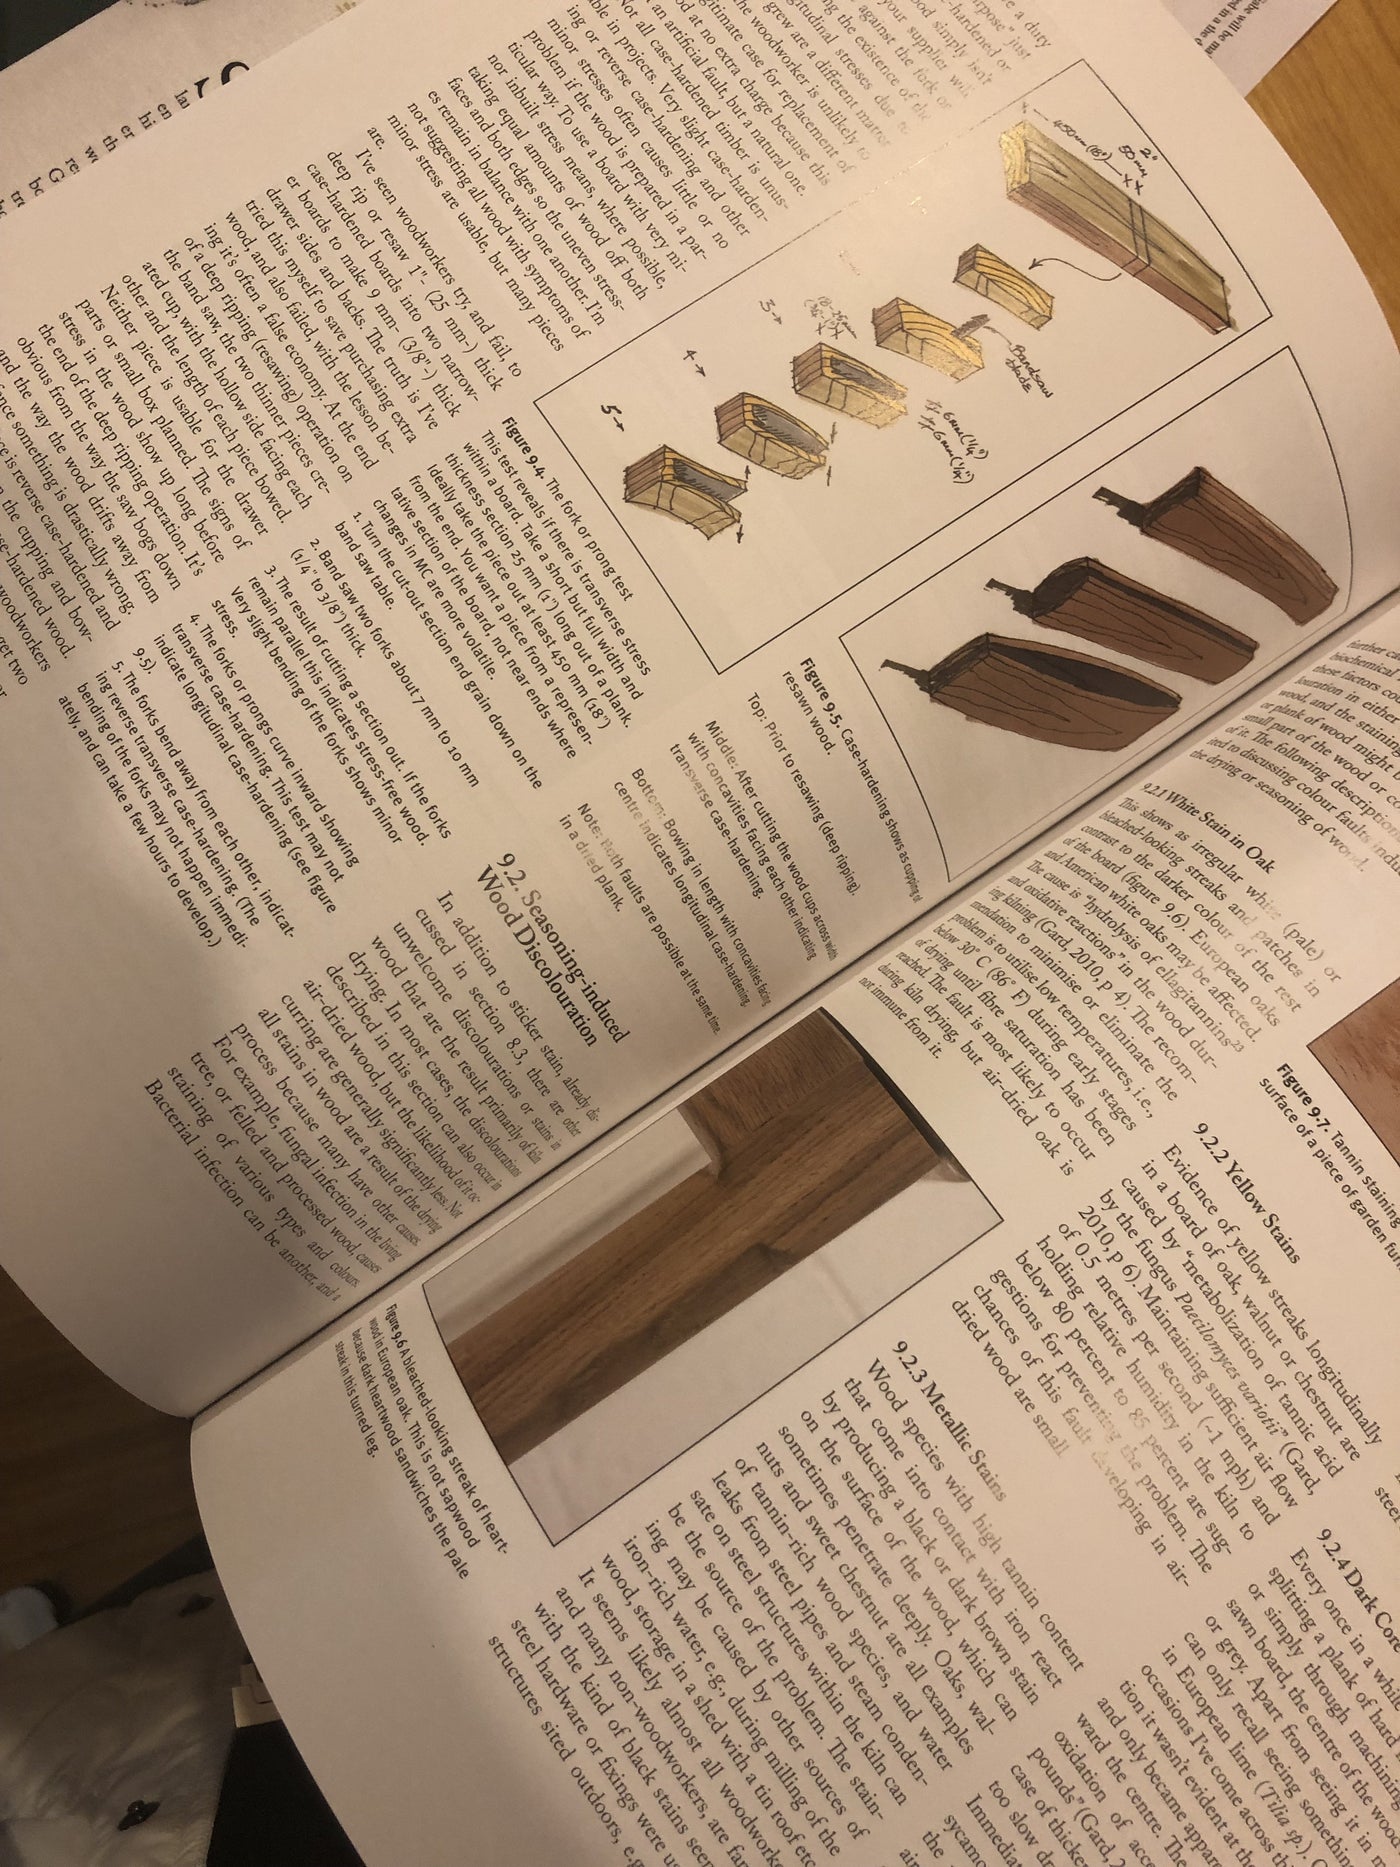 Cut & Dried - A Woodworker's Guide to Timber Technology